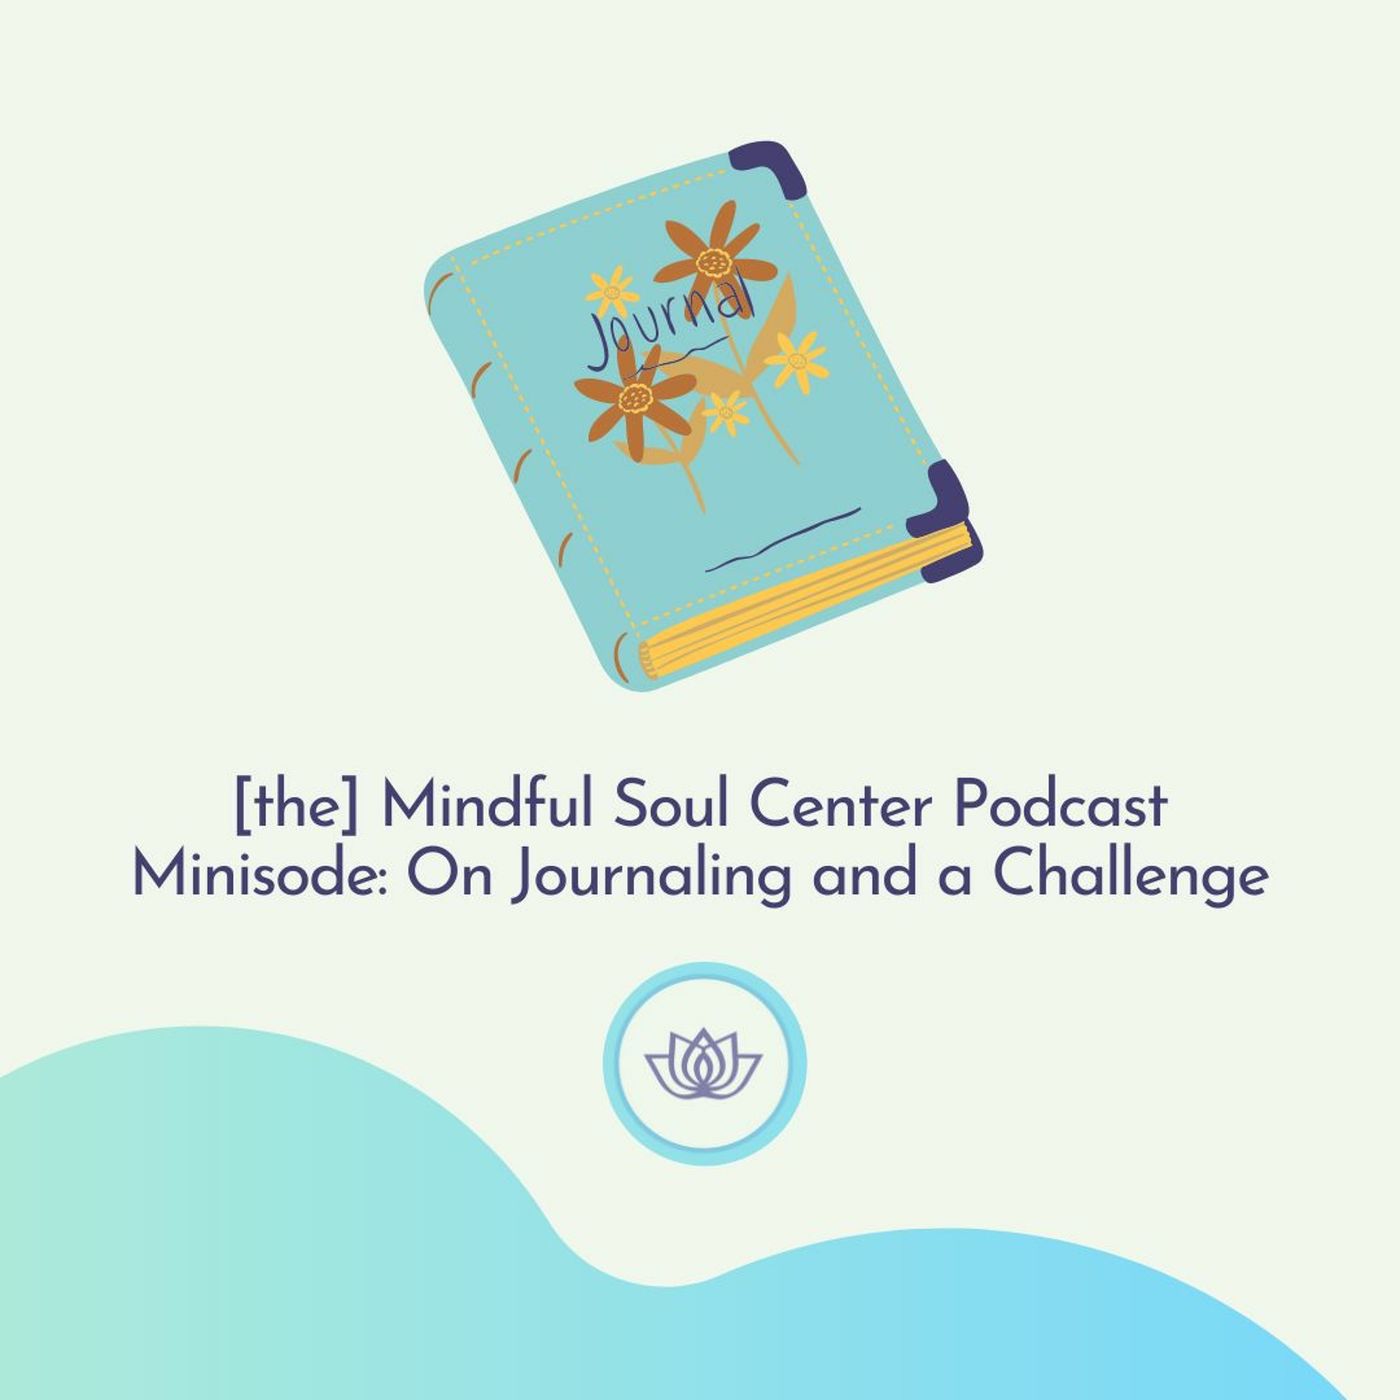 On Journaling and a Challenge